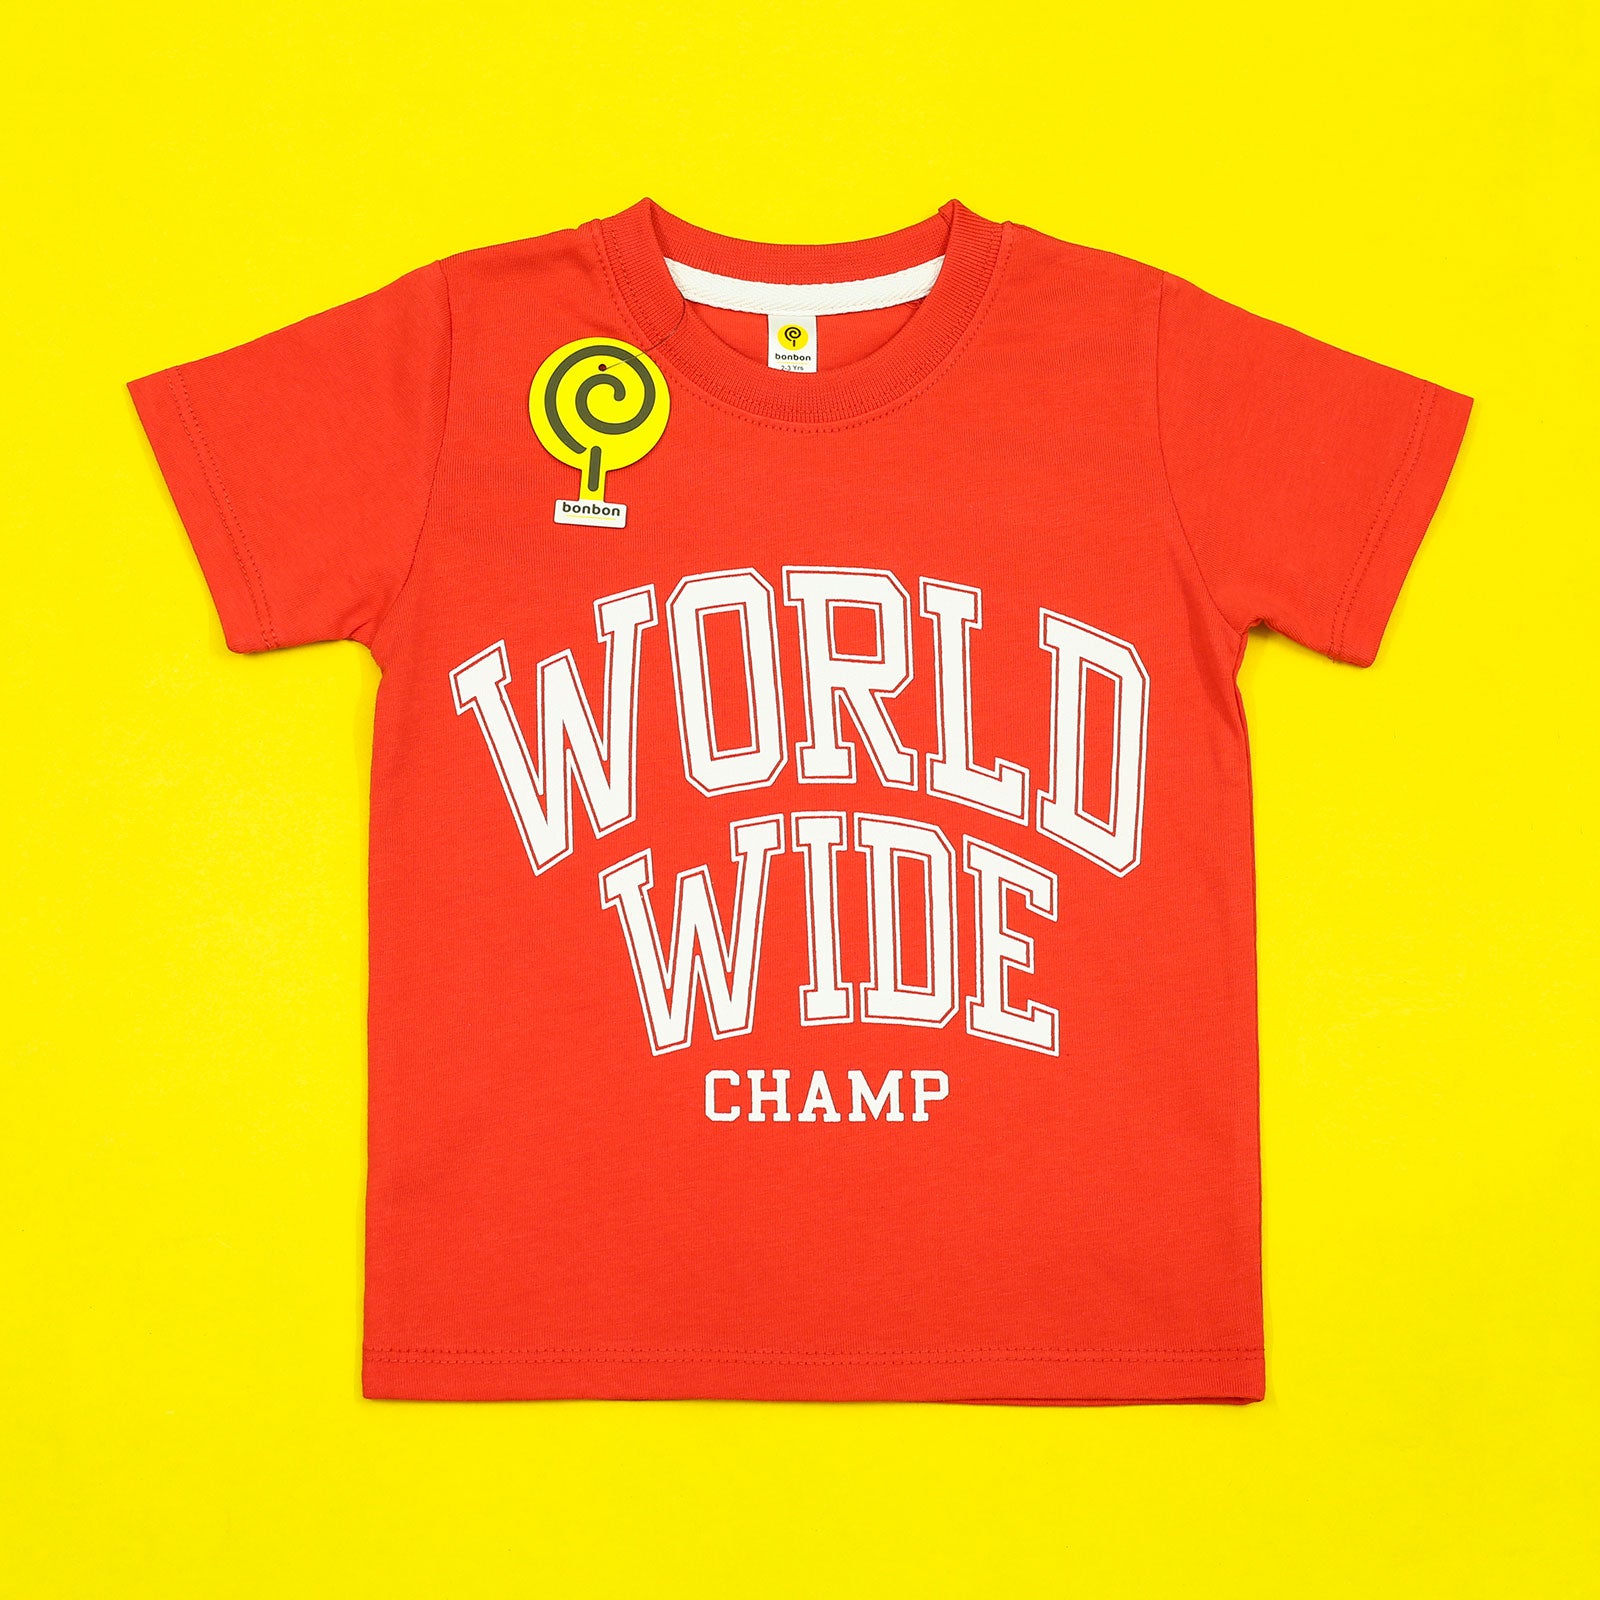 World Wide Bright Red Twinset